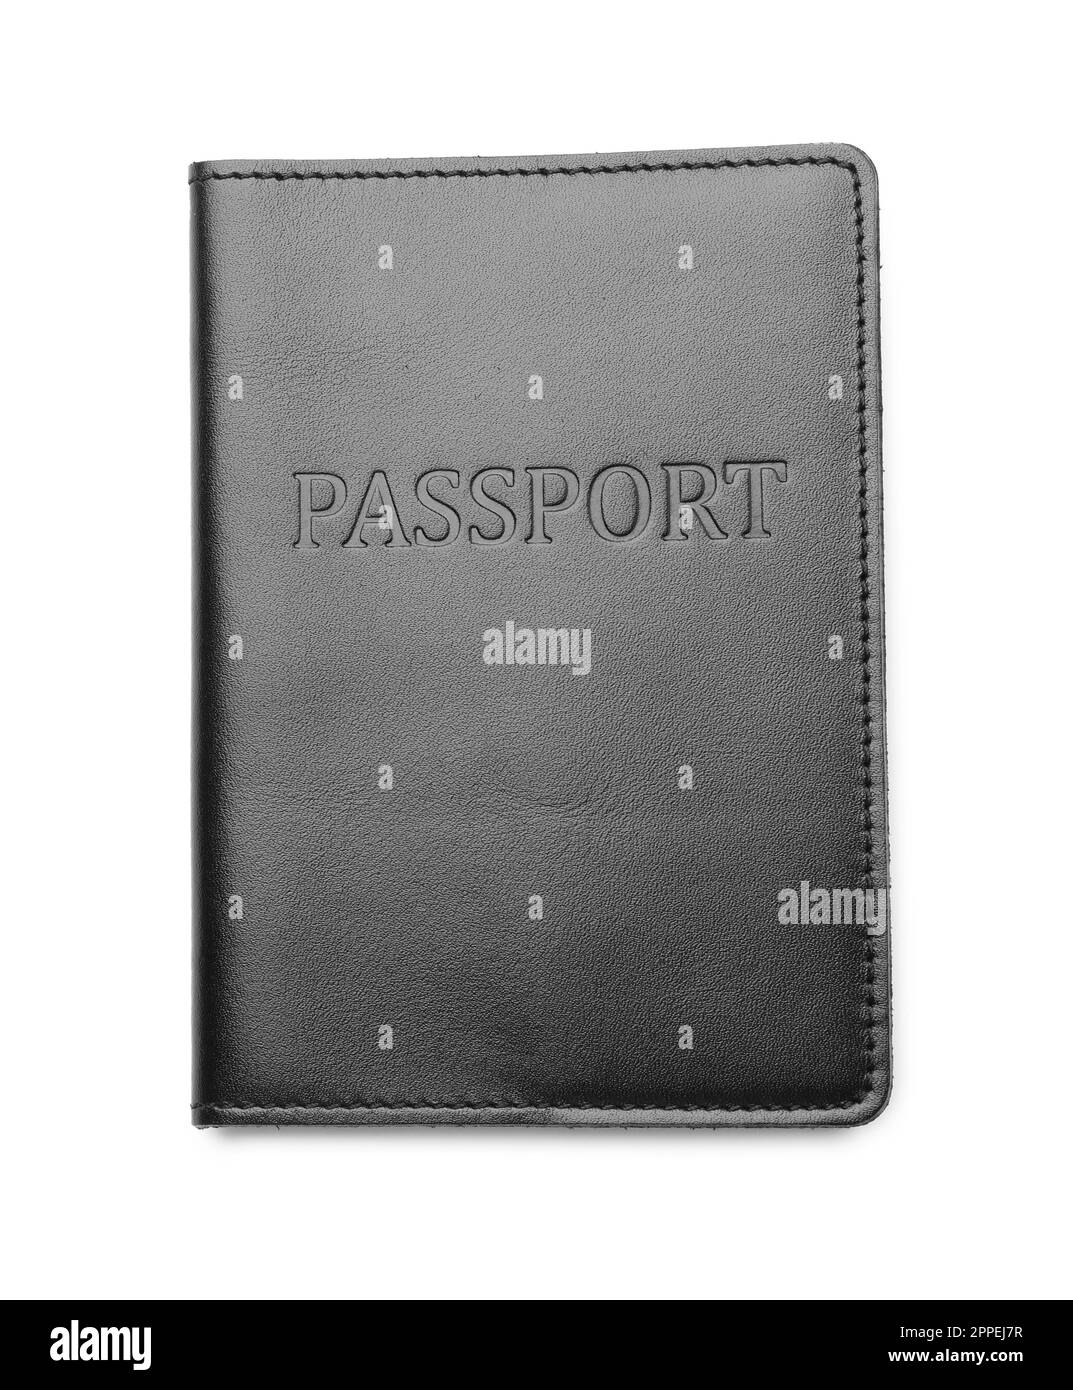 Passport in black leather case isolated on white, top view Stock Photo